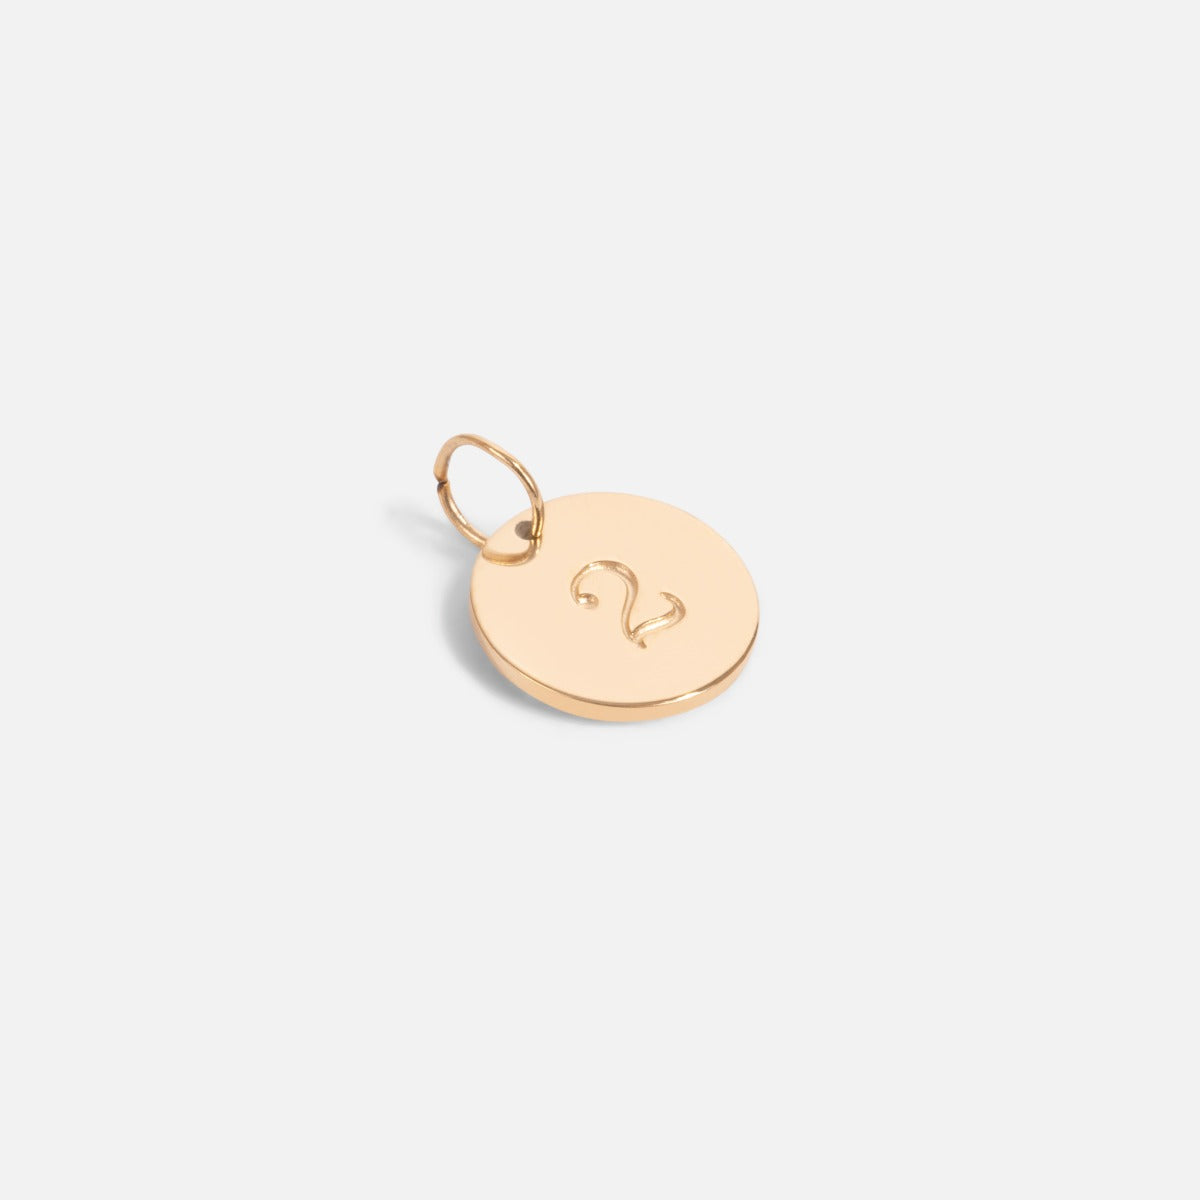 Small golden charm engraved with the number "2"